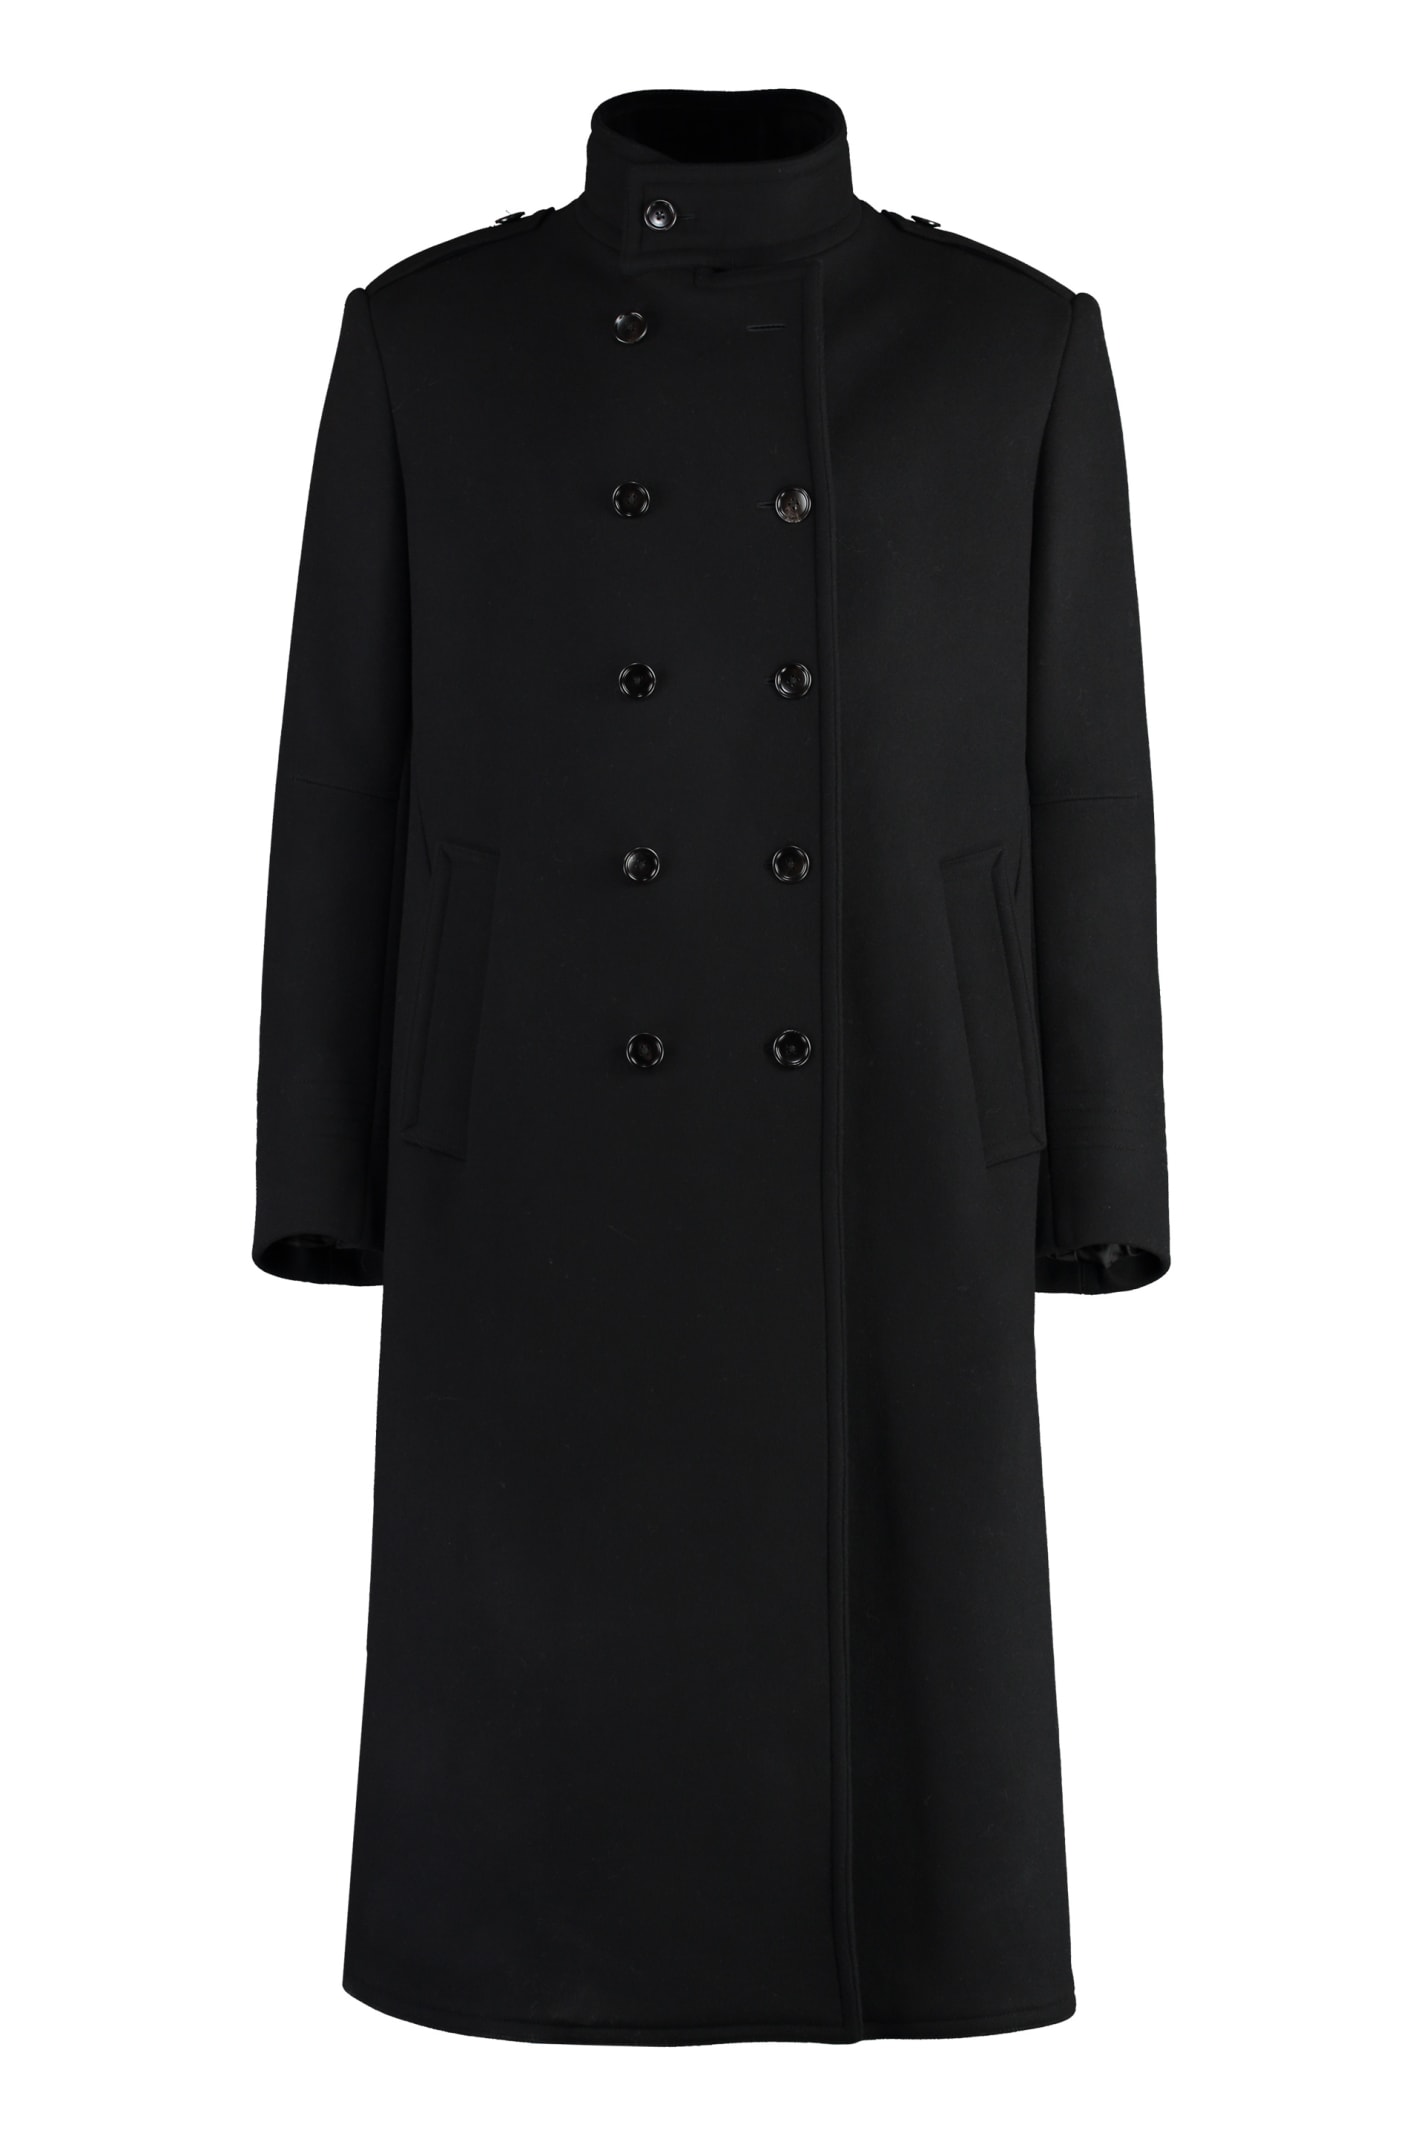 TOM FORD DOUBLE-BREASTED VIRGIN WOOL COAT